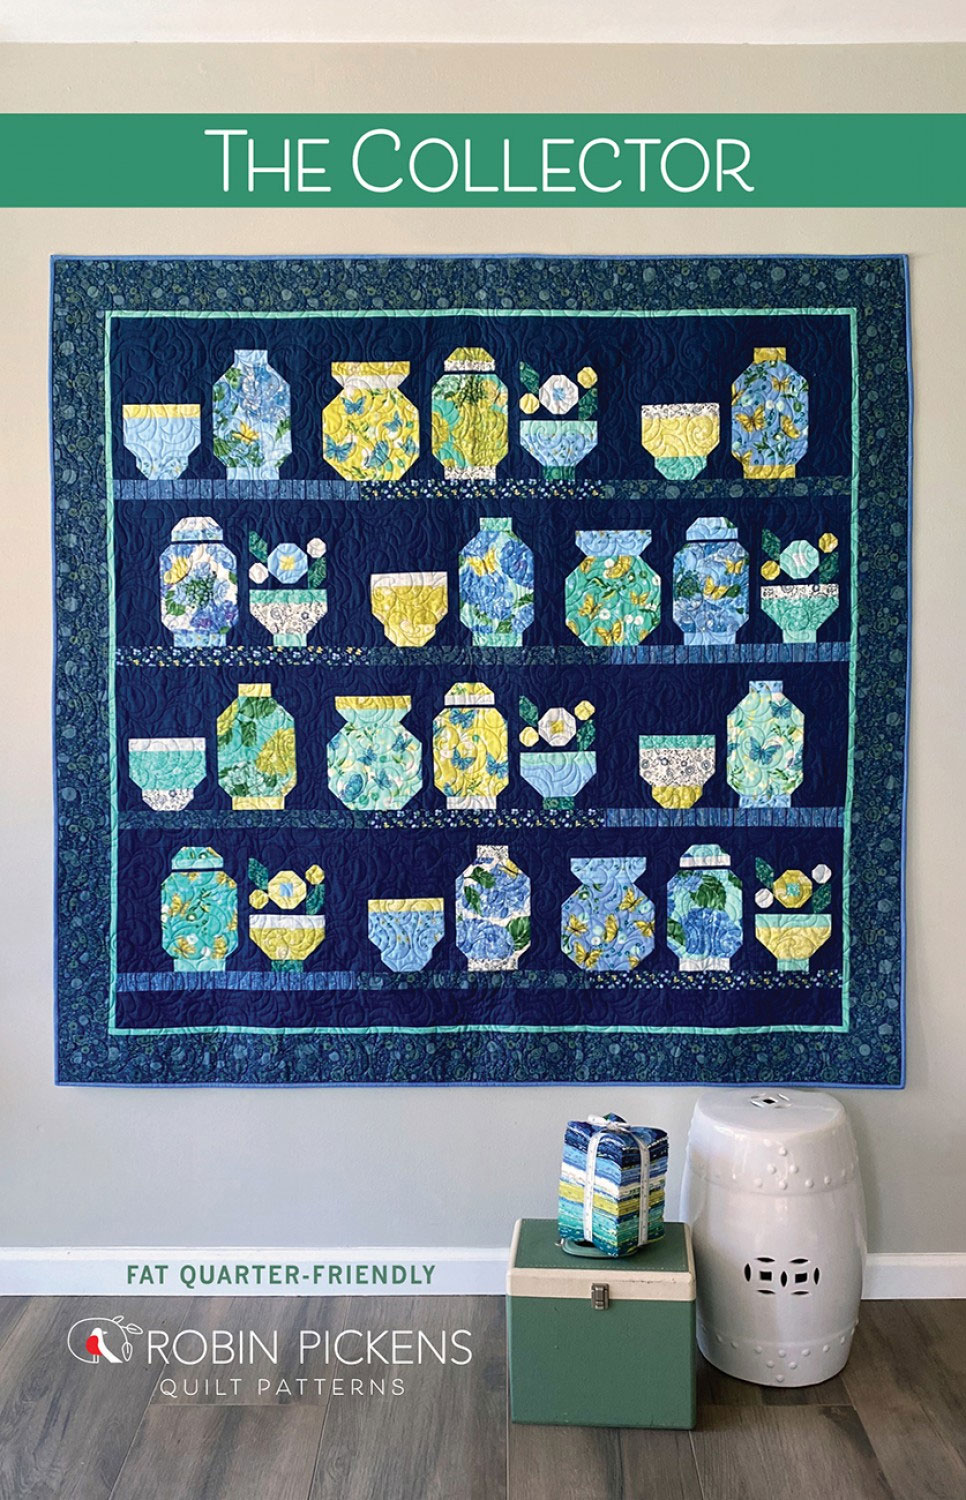 The-Collector-quilt-sewing-pattern-Robin-Pickens-front